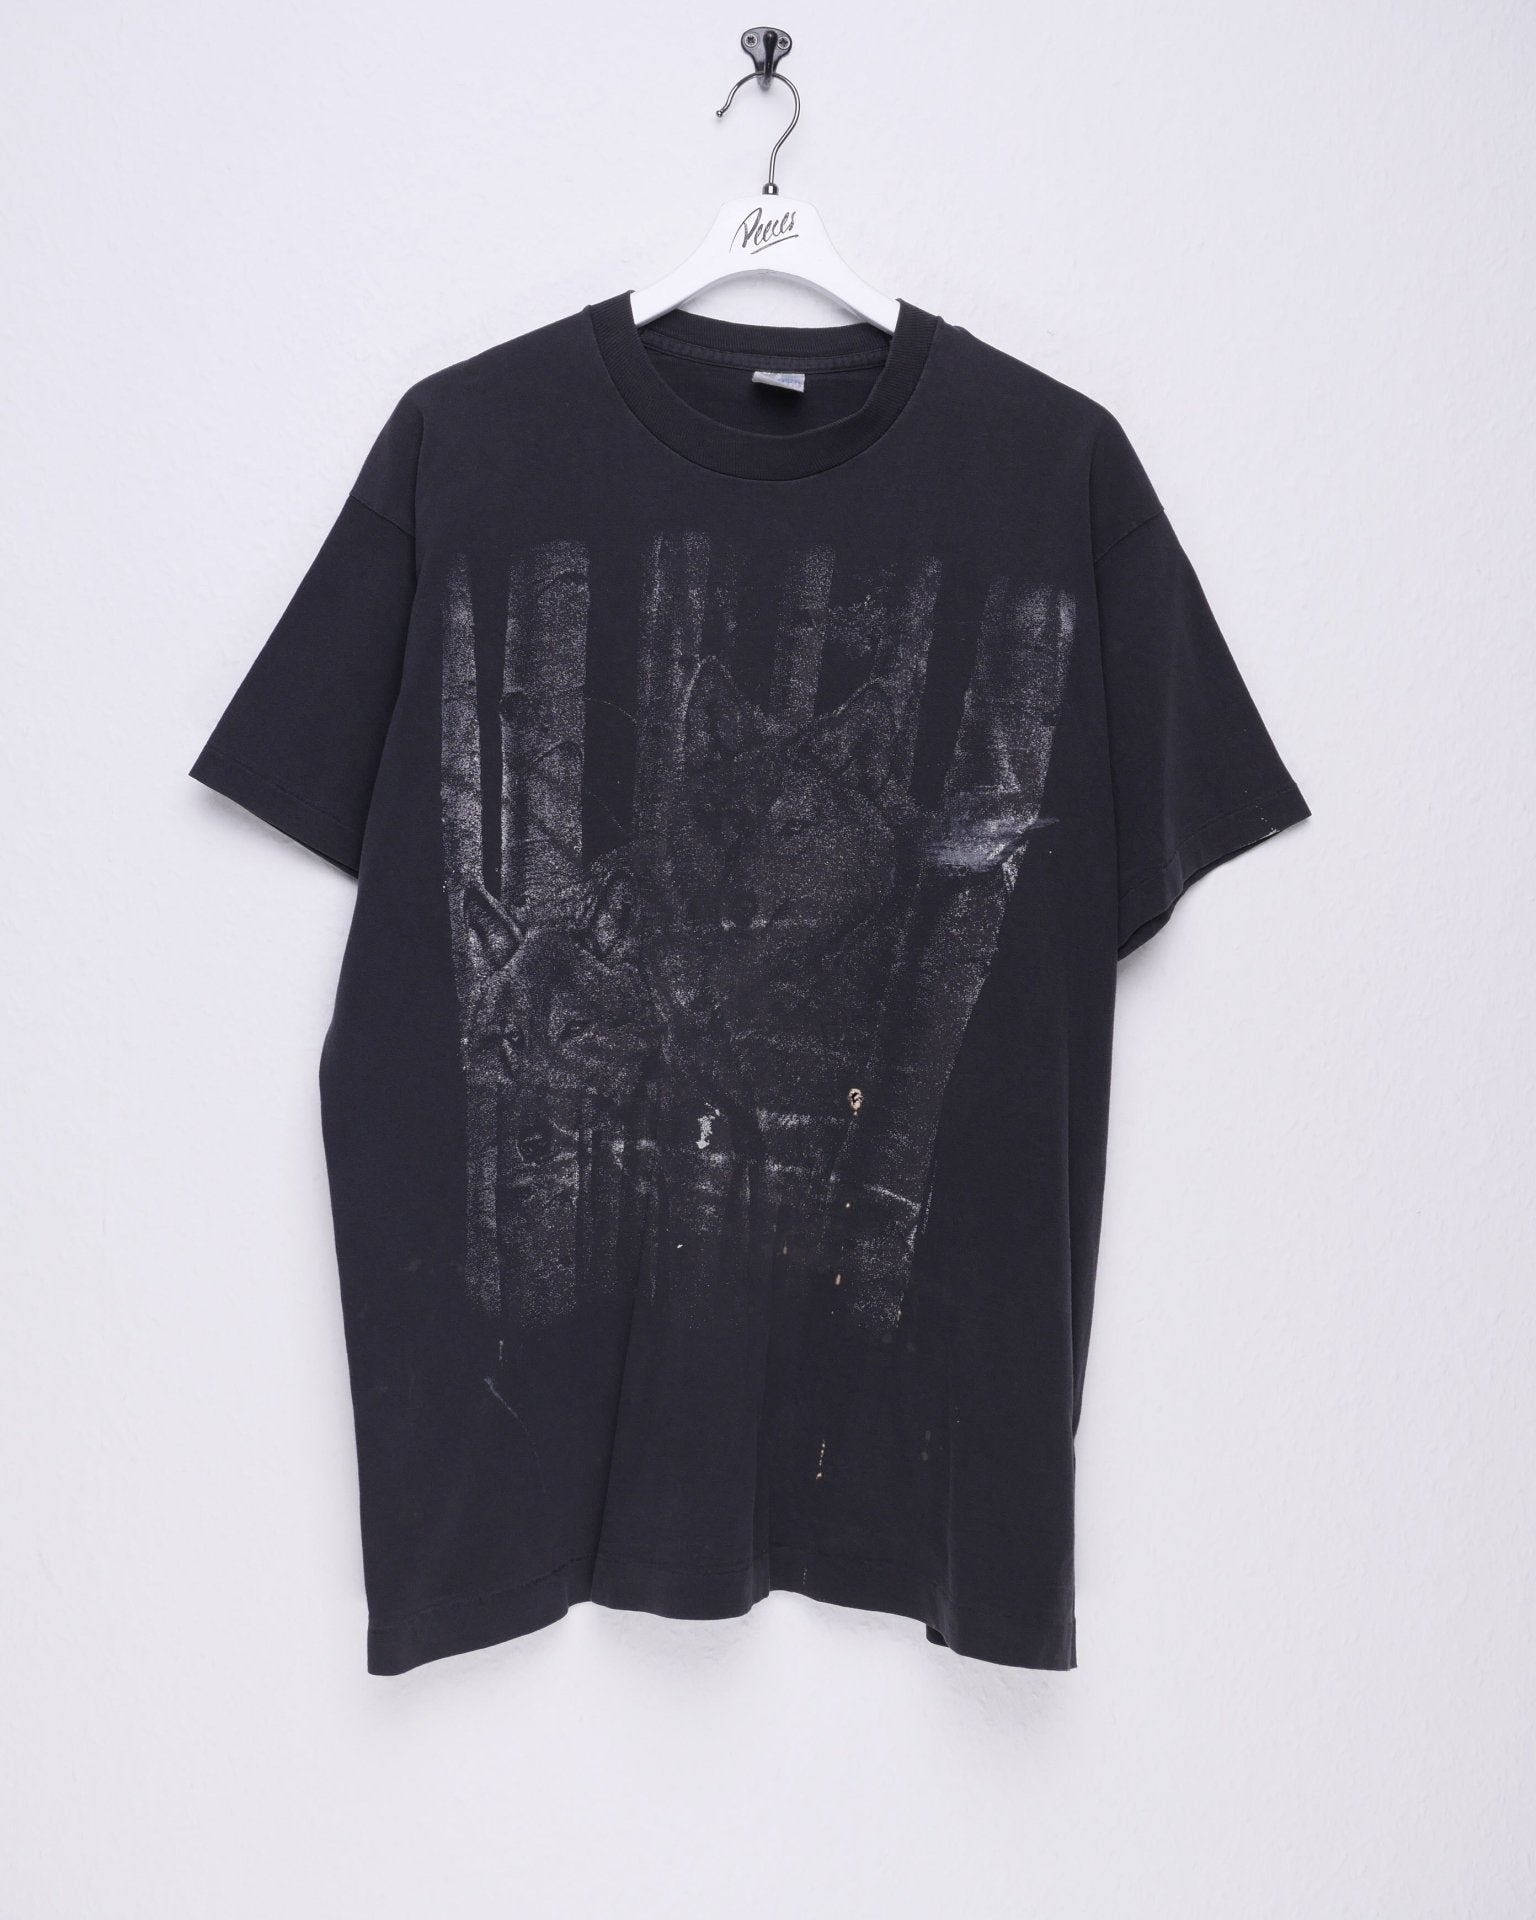 'Wolves' printed Graphic black Shirt - Peeces